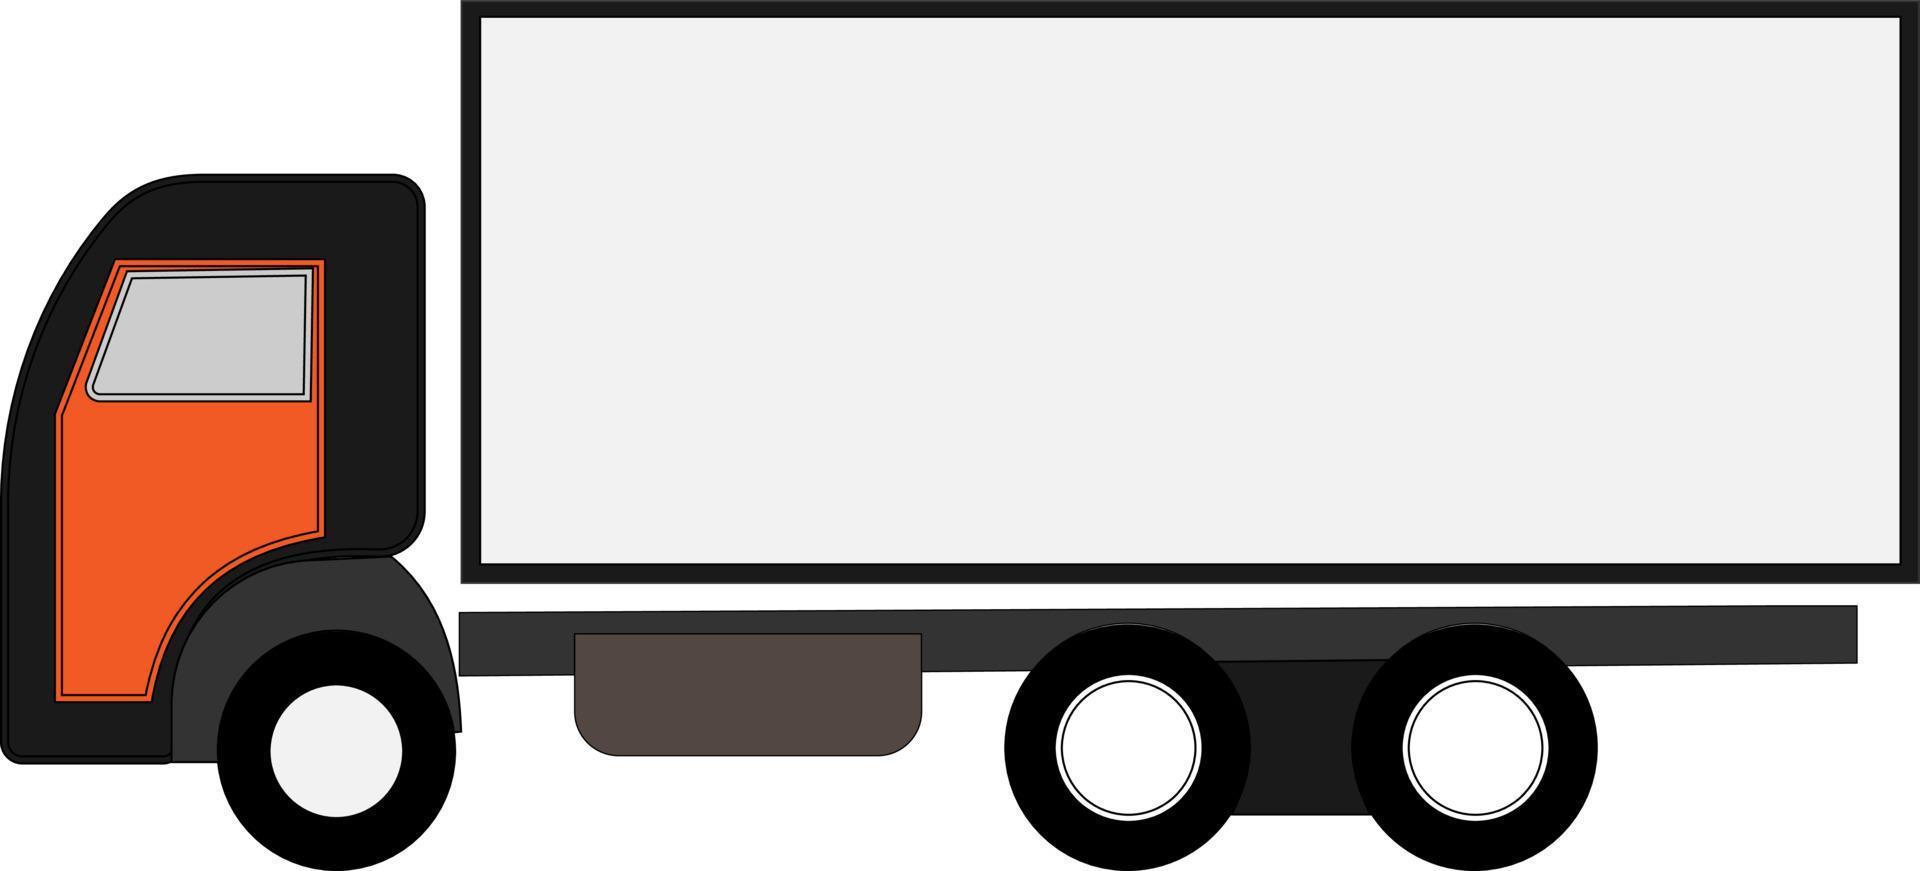 expedition truck icon or symbol vector